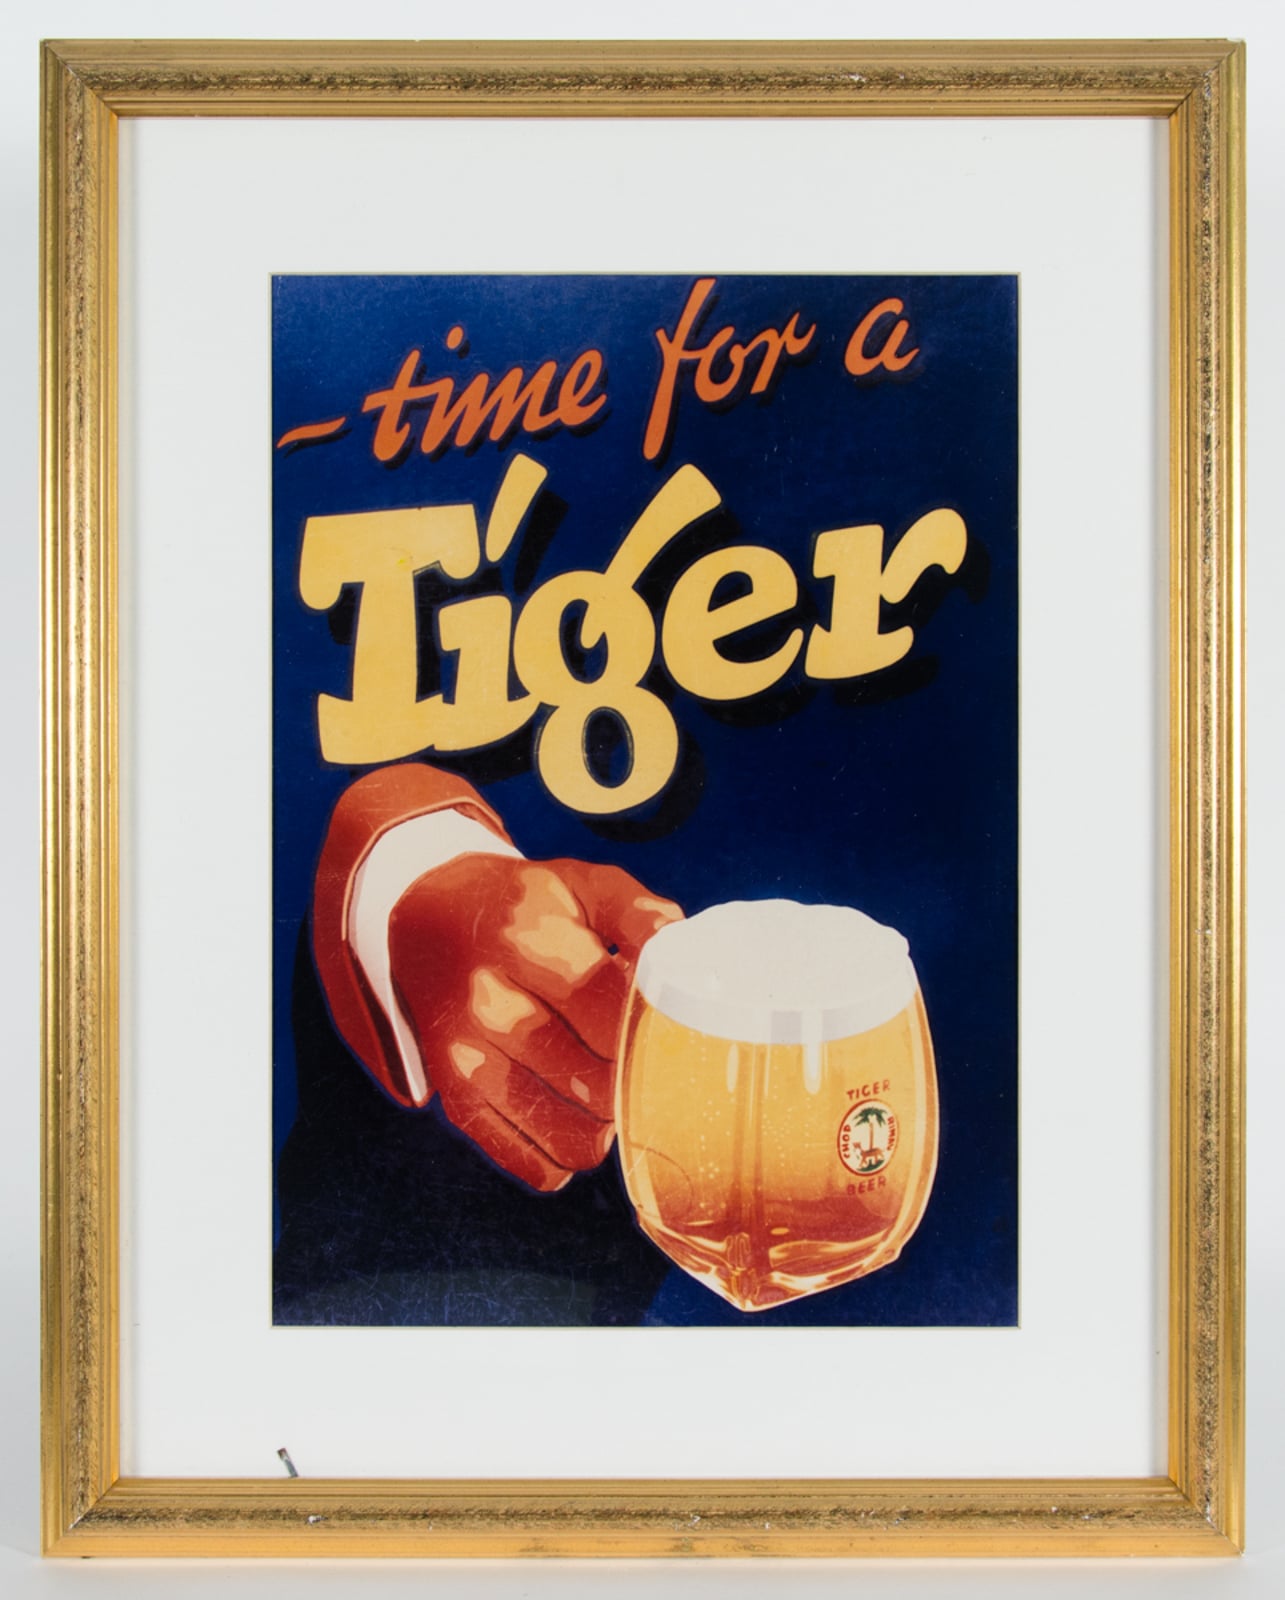 Time for a Tiger Advertisement